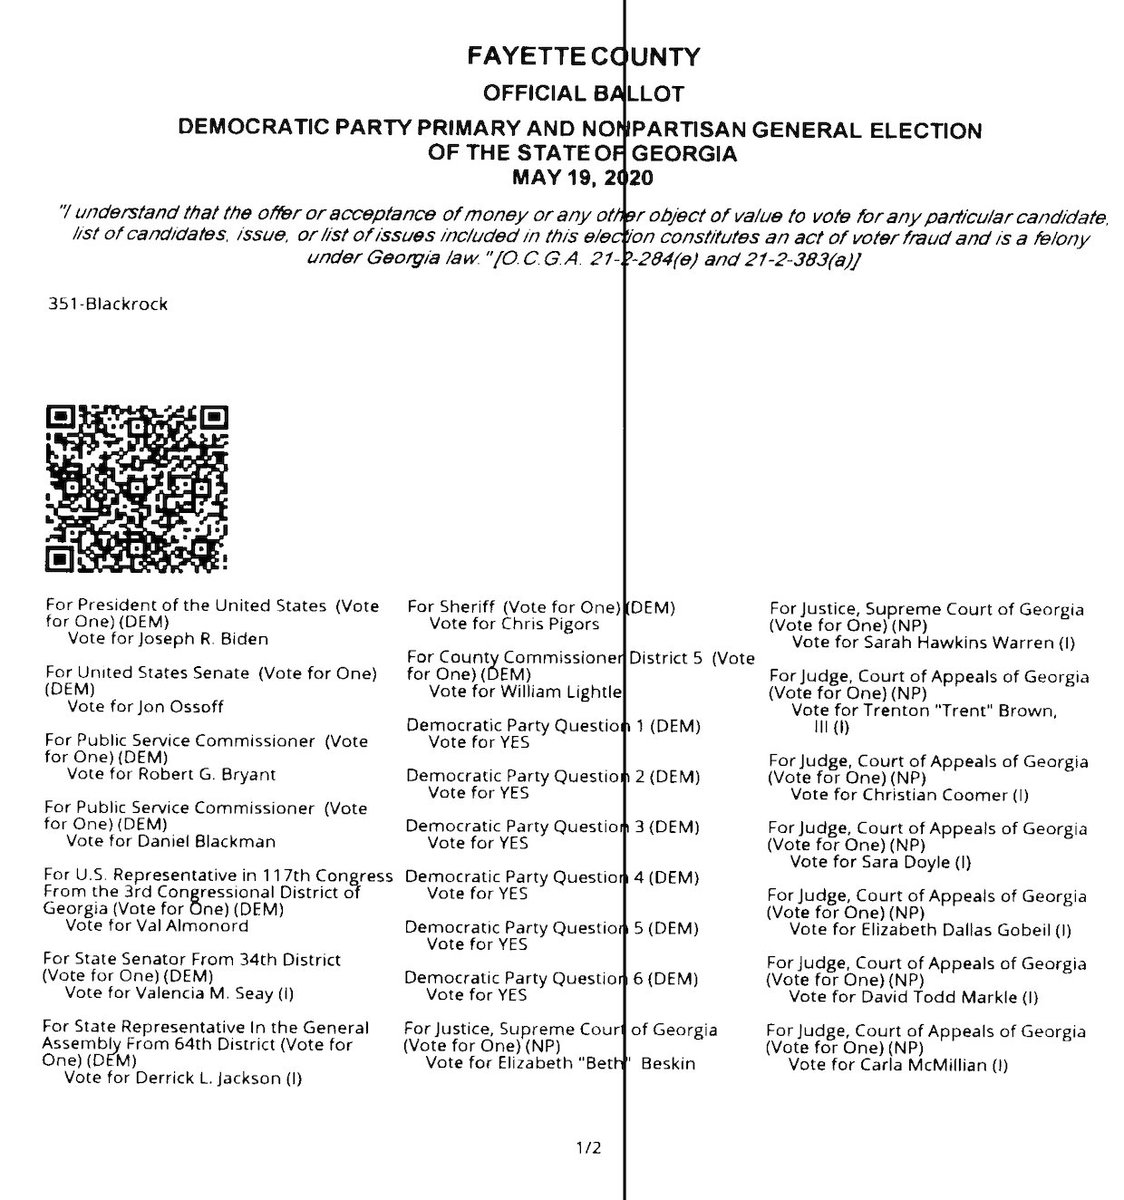 1/ I get questions frequently from people who have heard the SOS say that the BMD QR code ballots can be audited to tell who won. I'll explain why he is wrong.Your BMD ballot vote is stored in the barcode. The text doesn't count. The computer reads only the QR code.